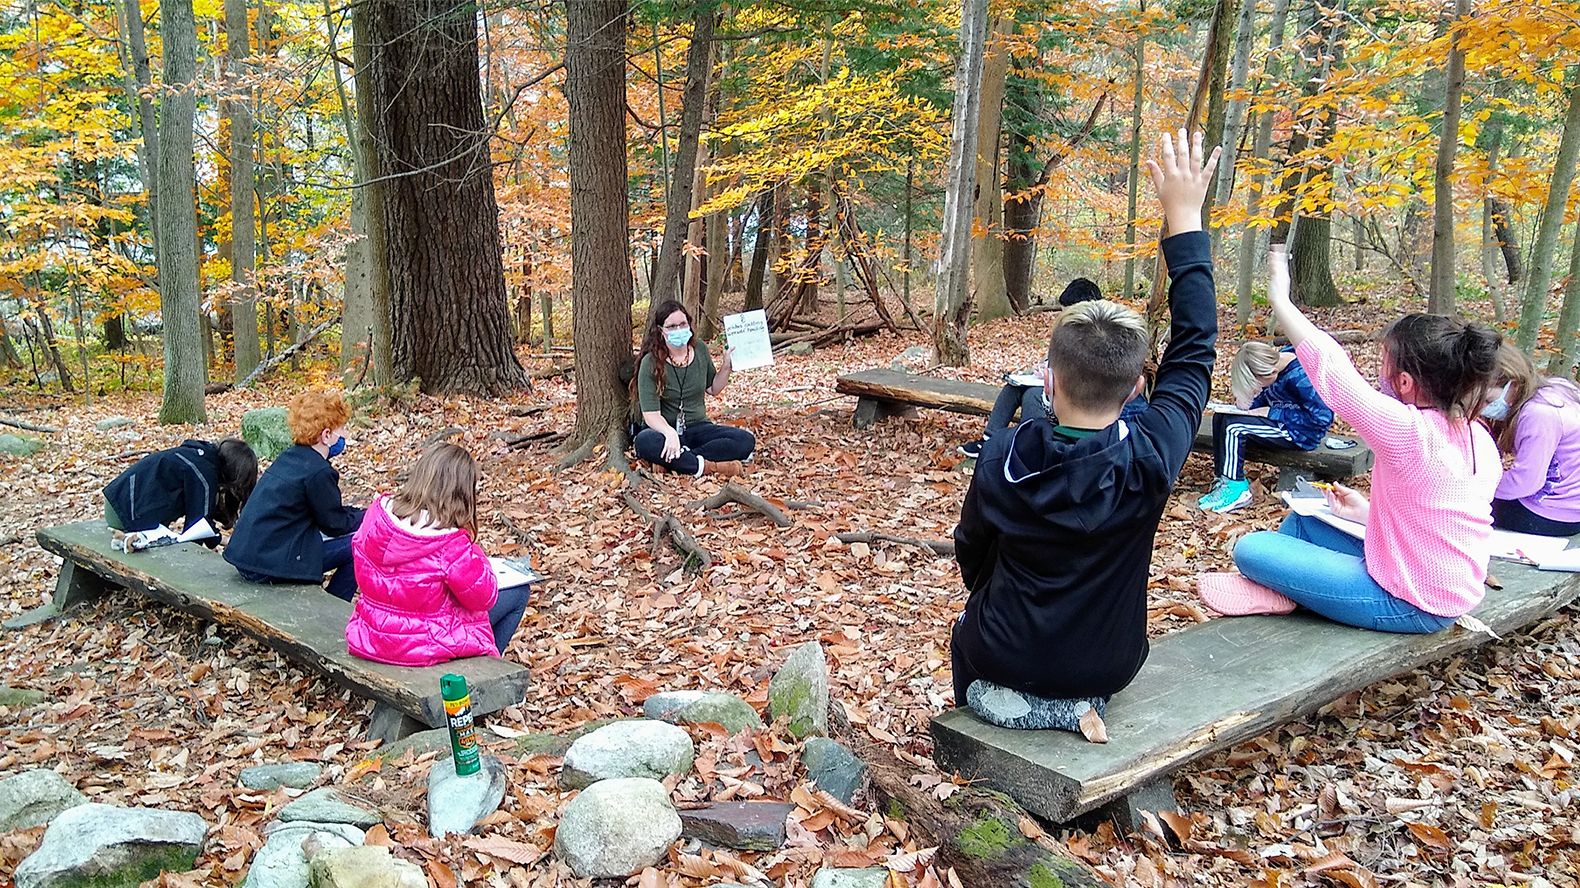 Getting Started With an Outdoor Classroom | Edutopia